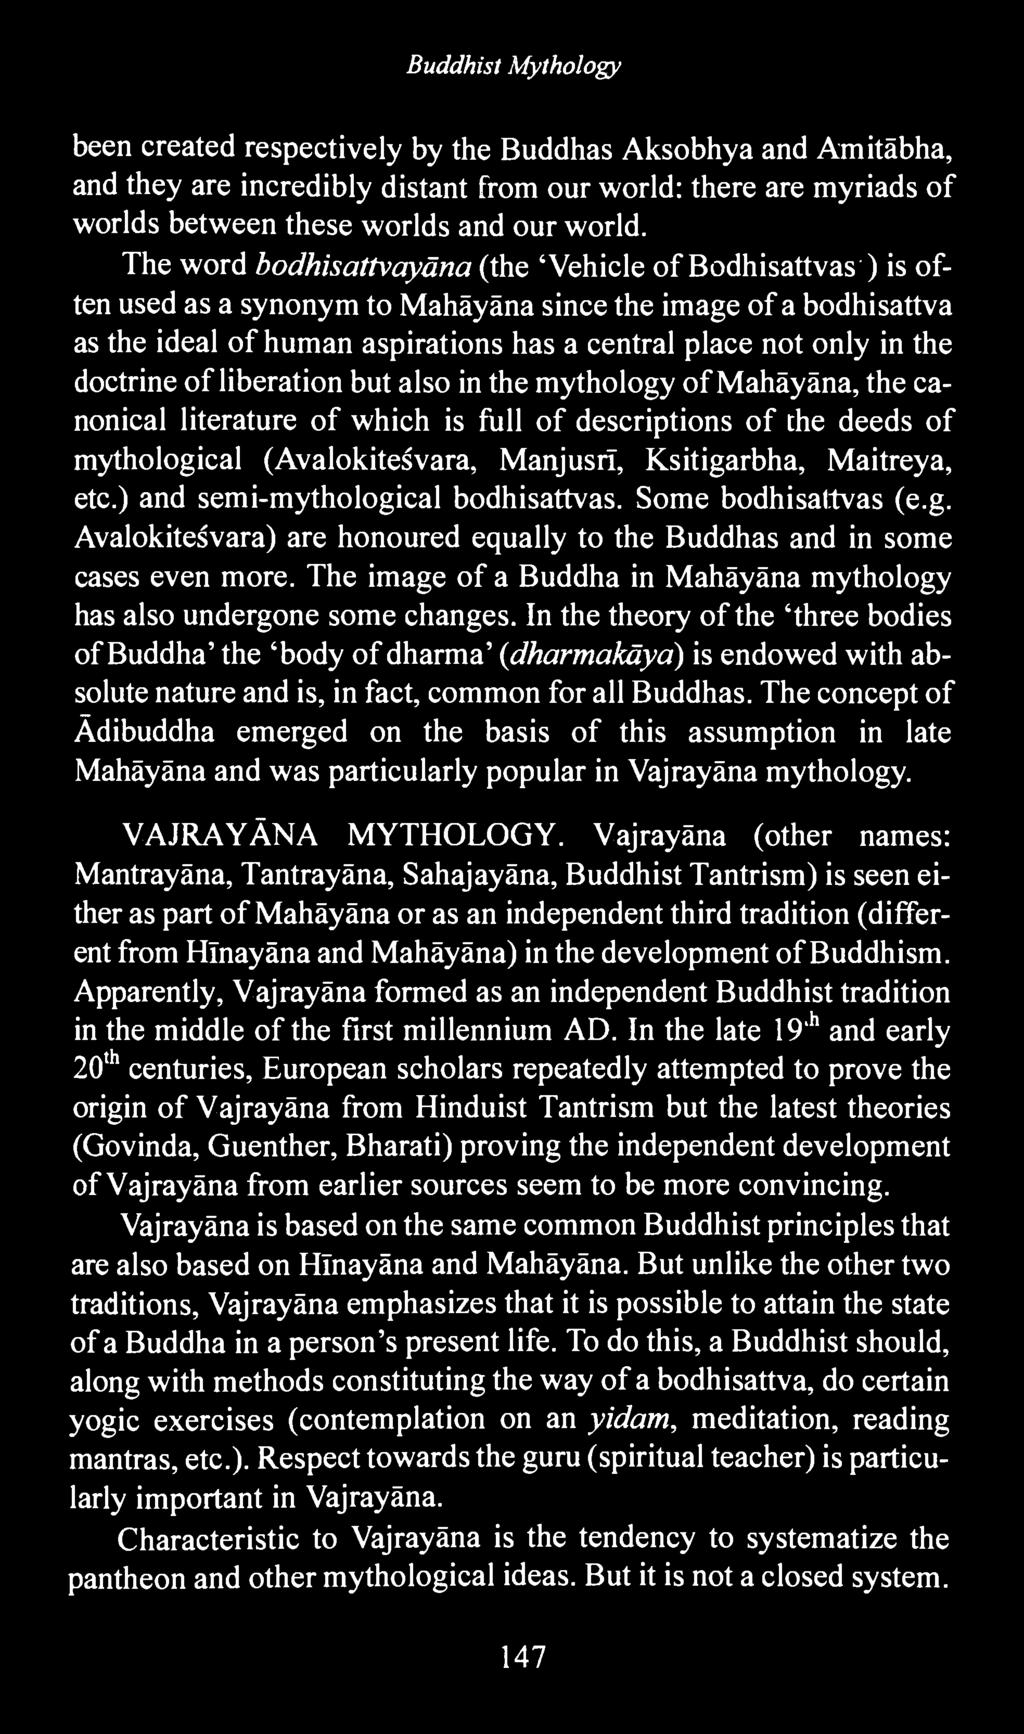 doctrine of liberation but also in the mythology of Mahäyäna, the canonical literature of which is full of descriptions of the deeds of mythological (Avalokitešvara, Manjusrï, Ksitigarbha, Maitreya,